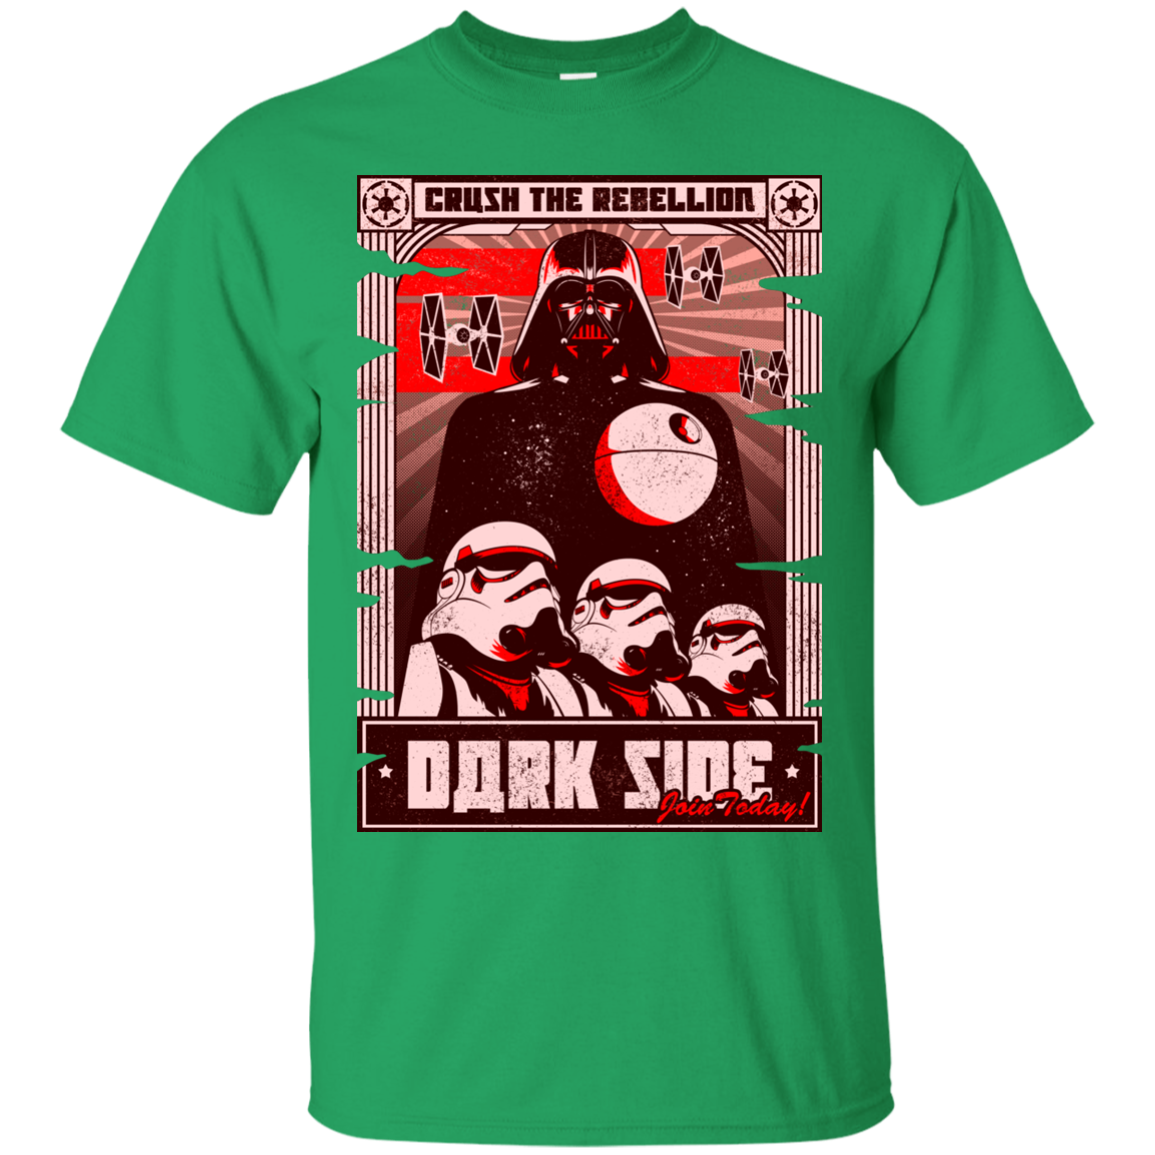 Join the Dark SIde T-Shirt